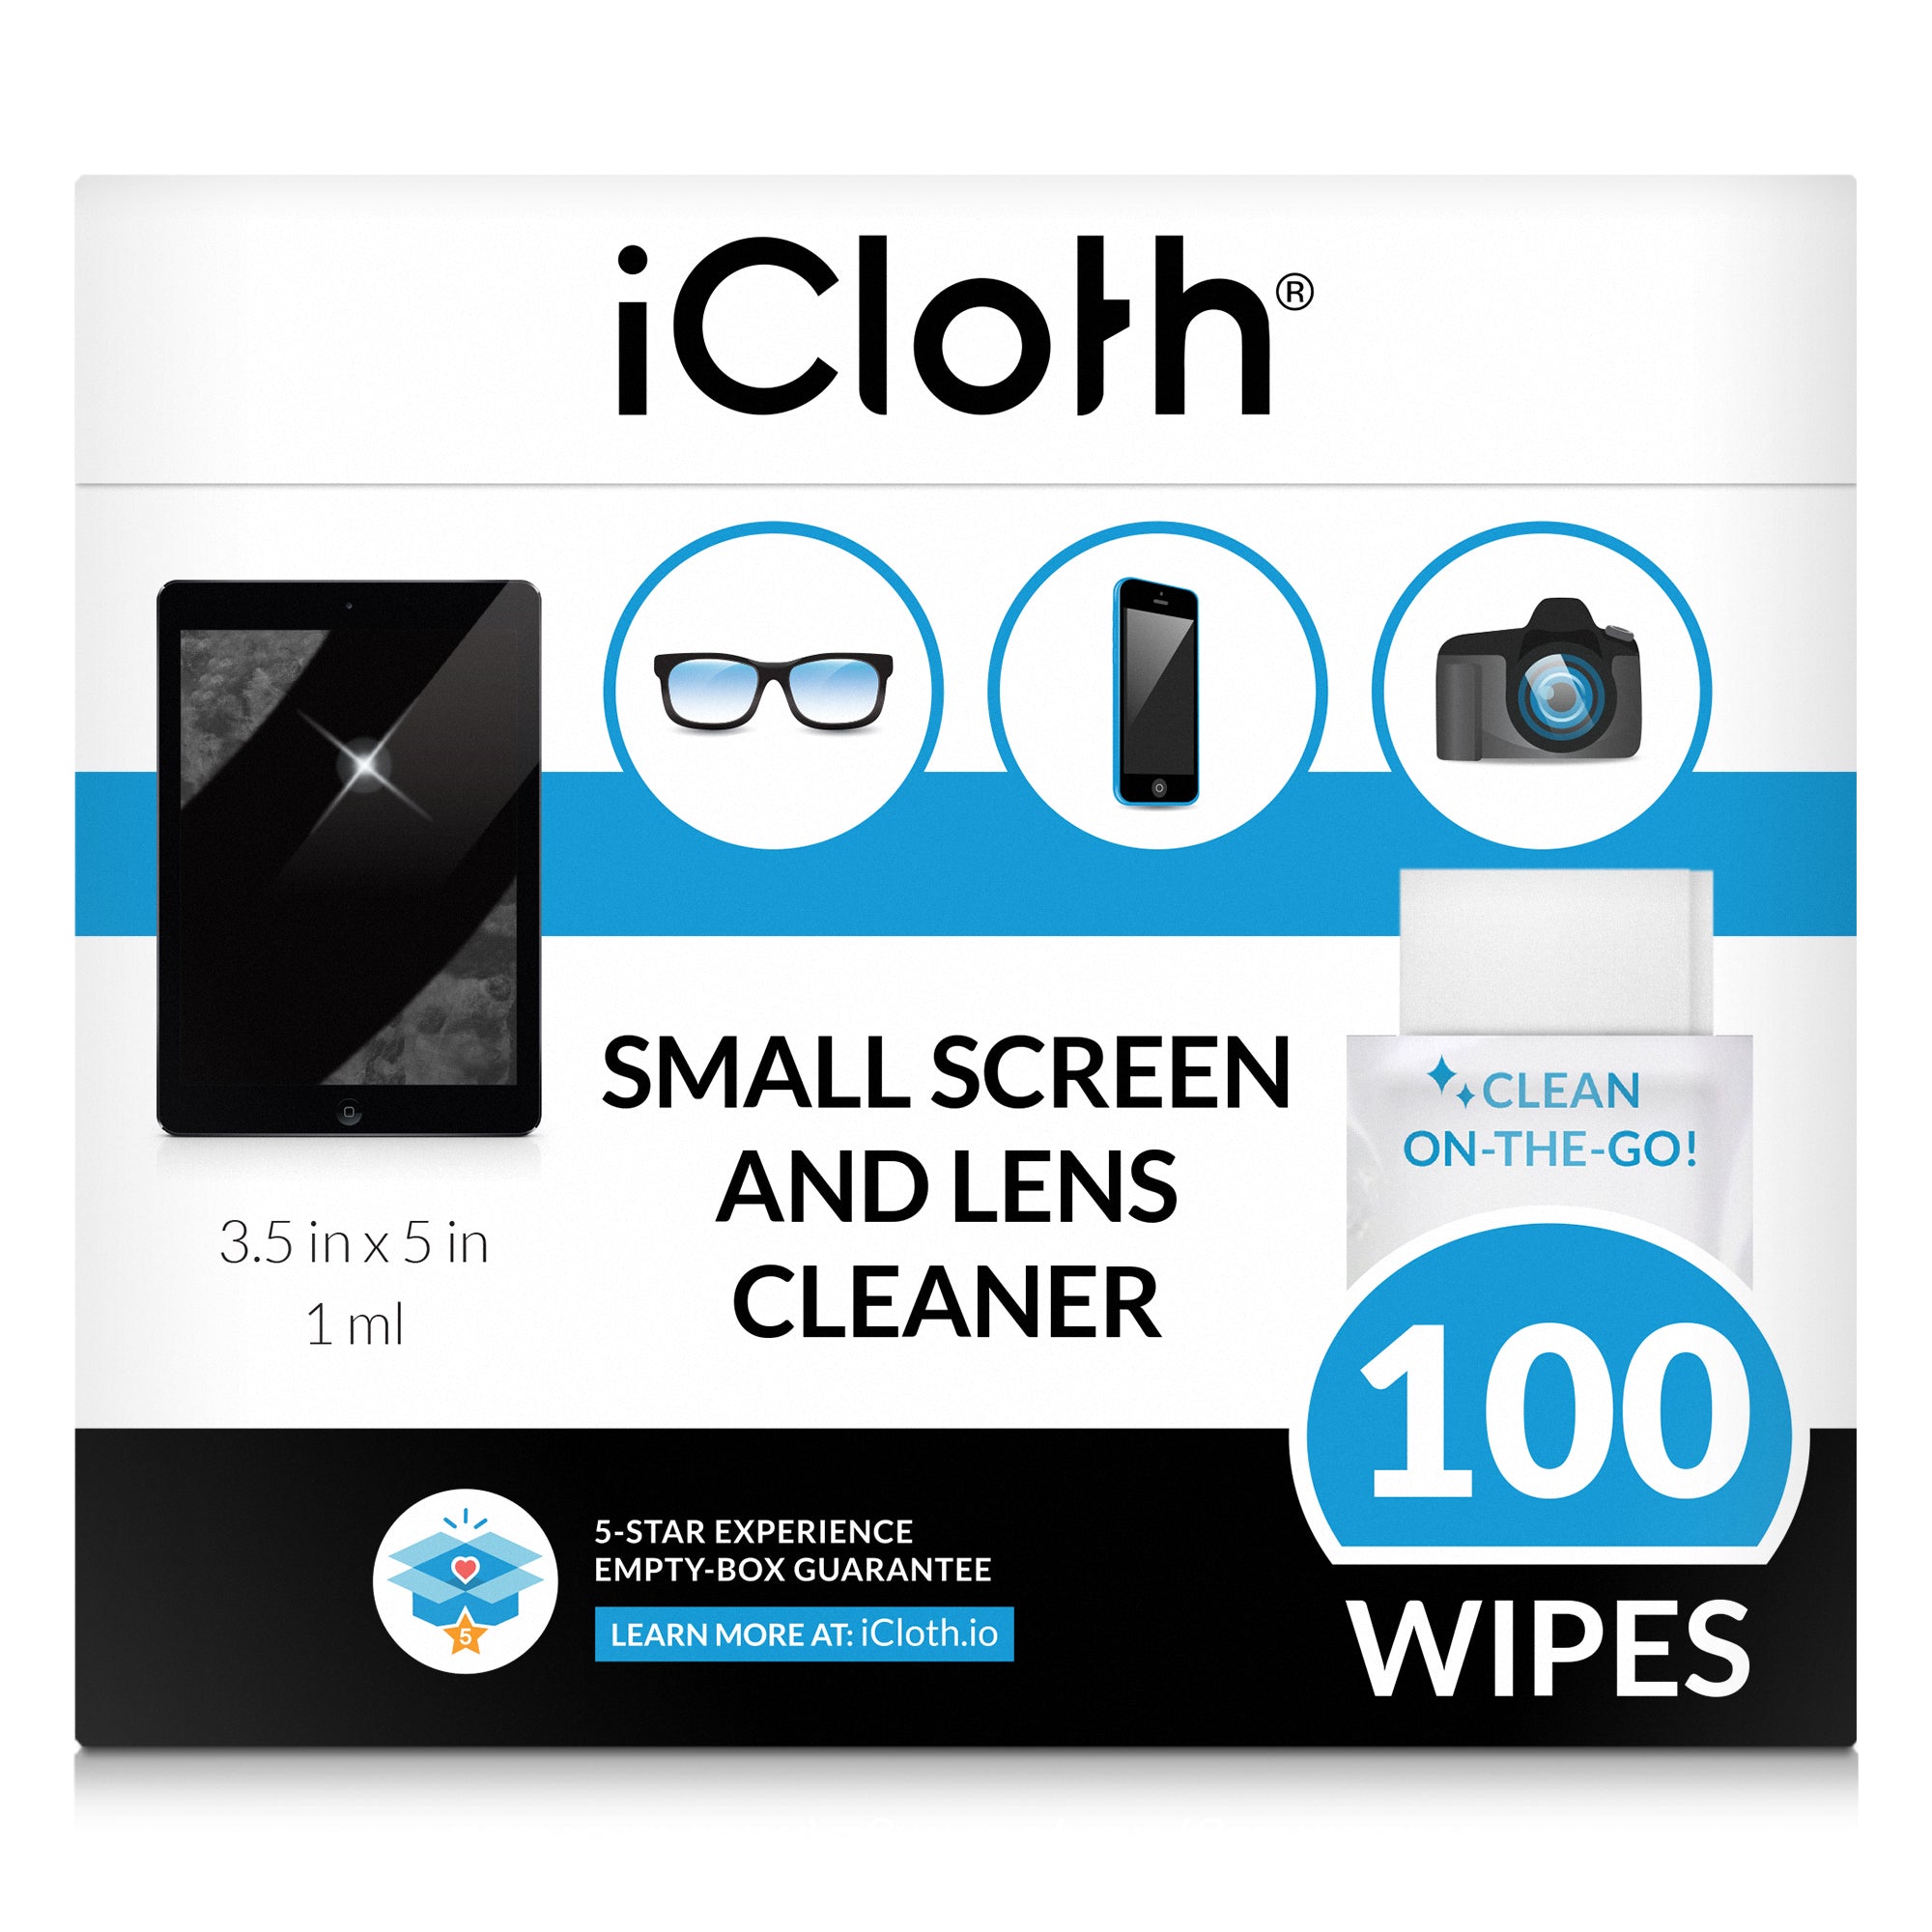 100 wipes of iCloth Small screen and lens cleaner